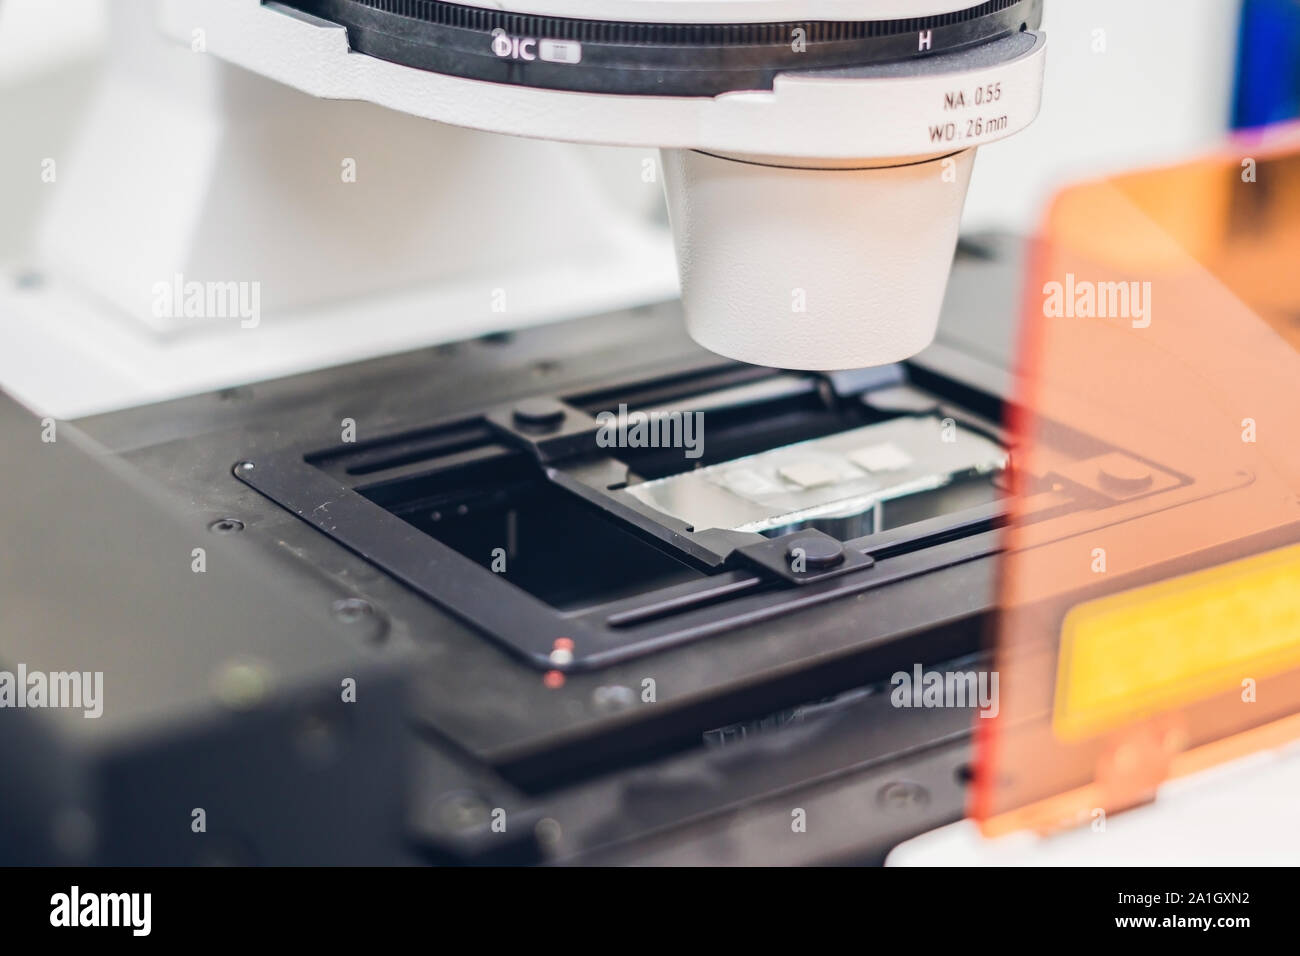 Confocal scanning microscope in laboratory for biological samples investigation. Stock Photo